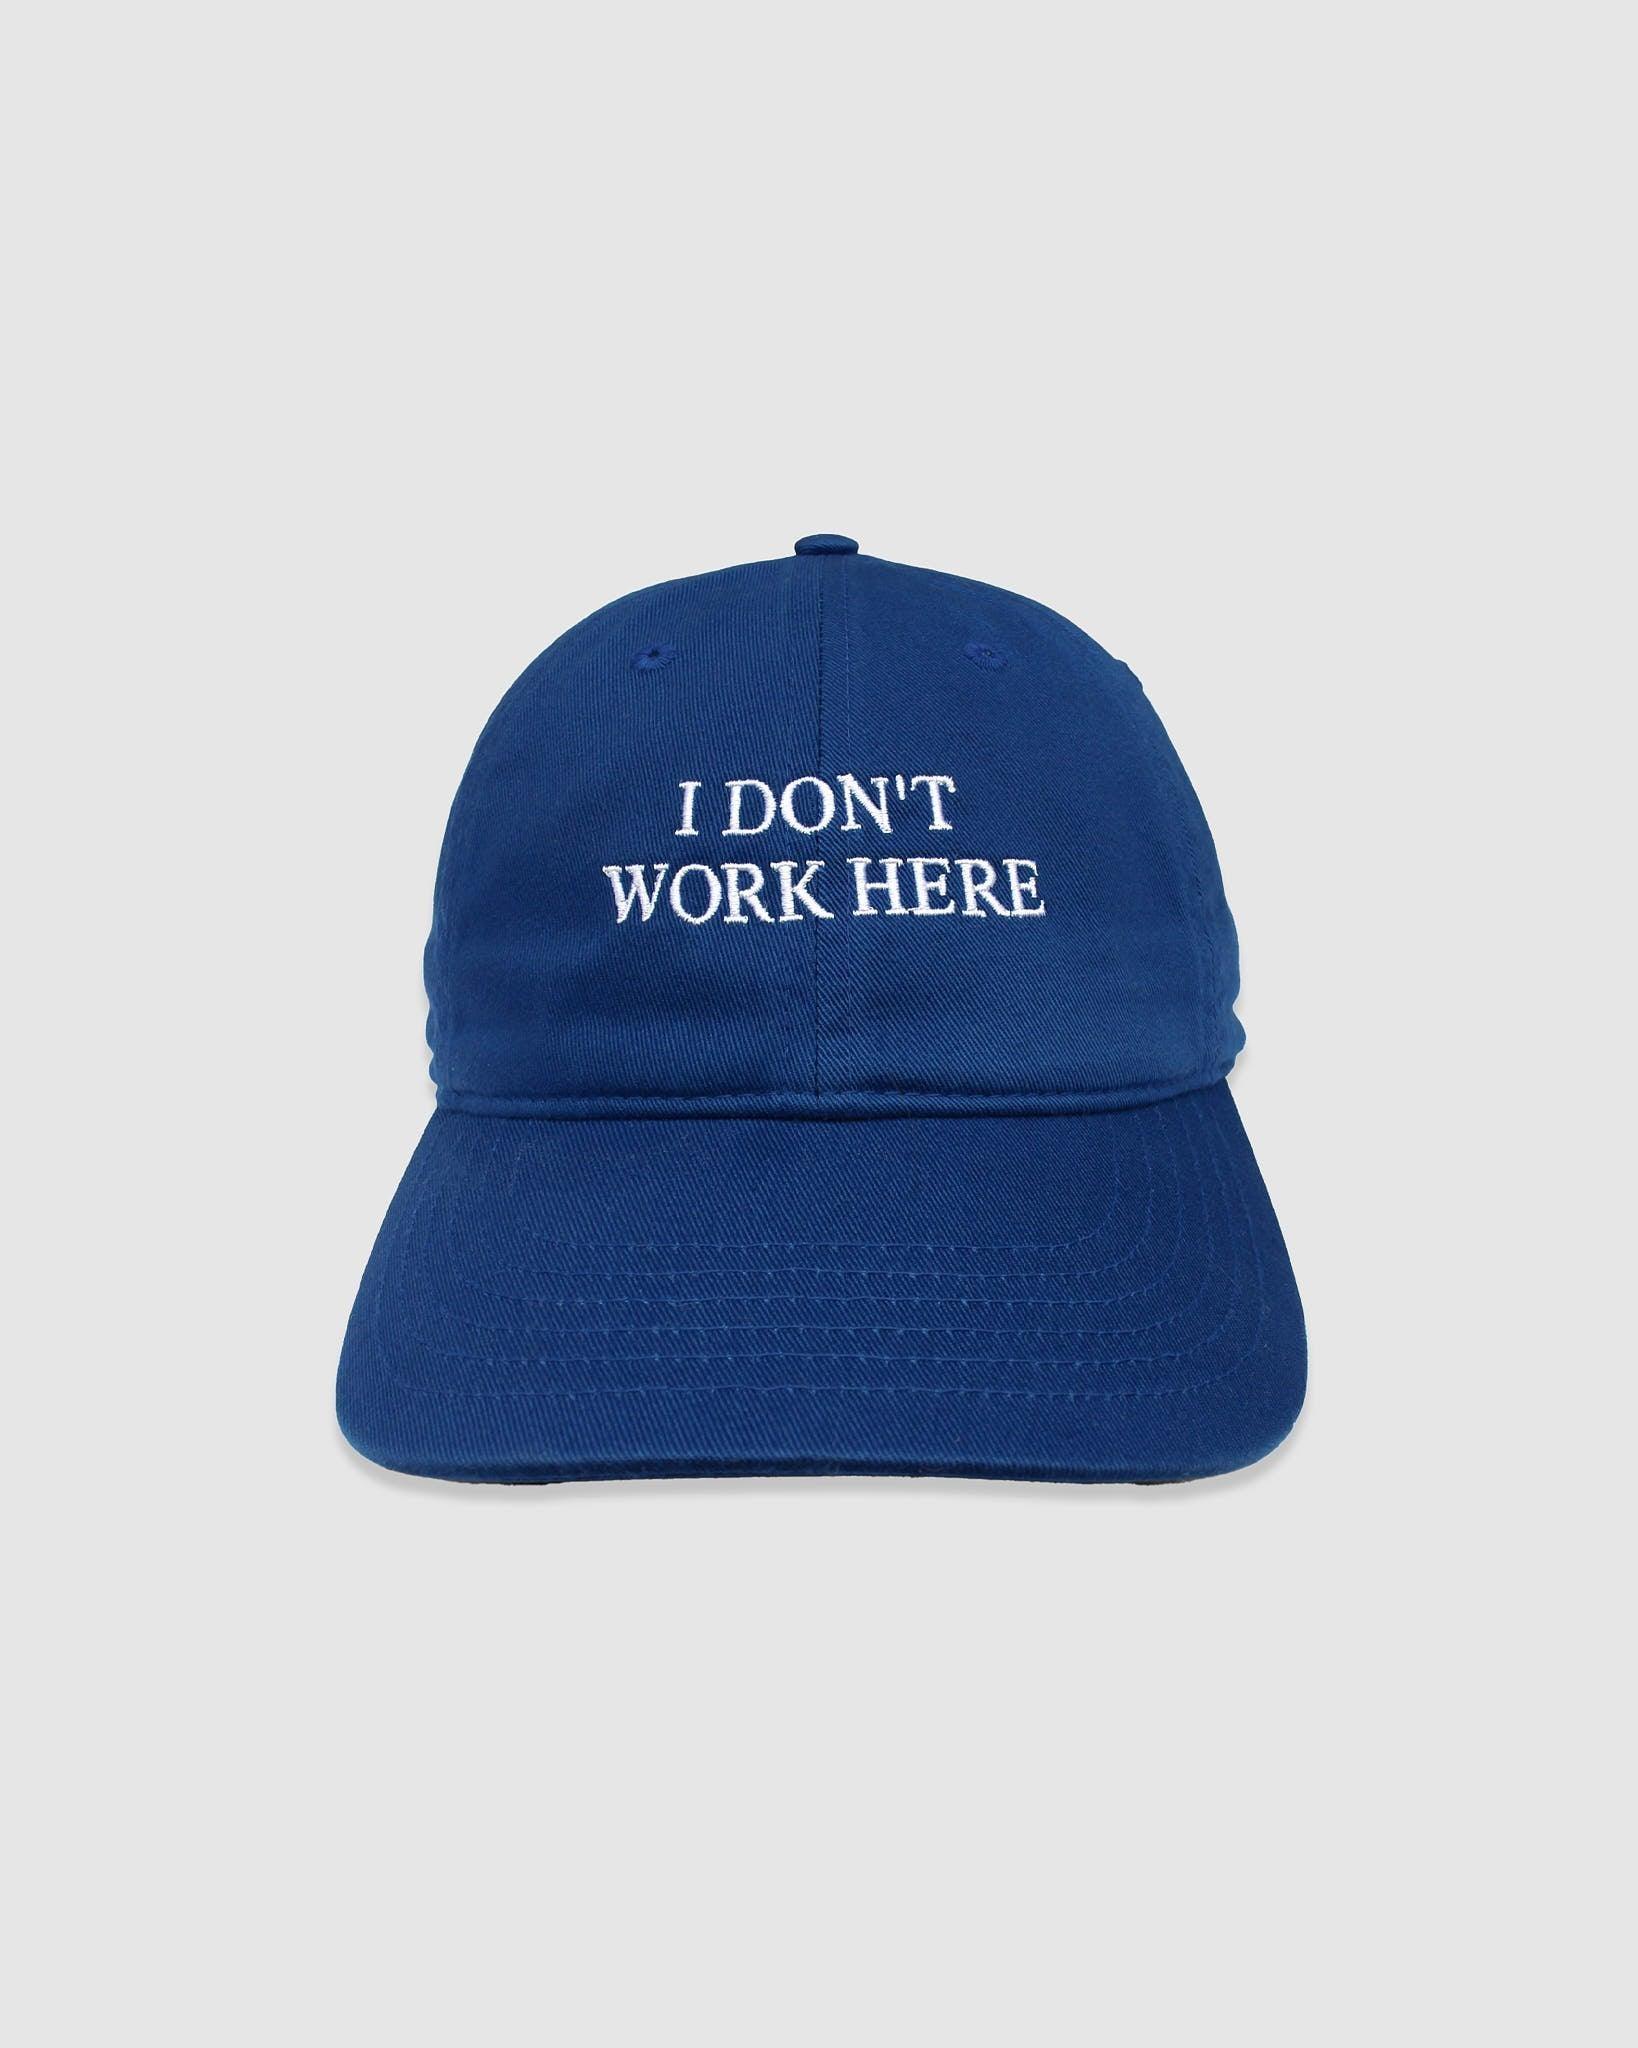 IDEA Sorry I Don't Work Here Hat – Chinatown Country Club